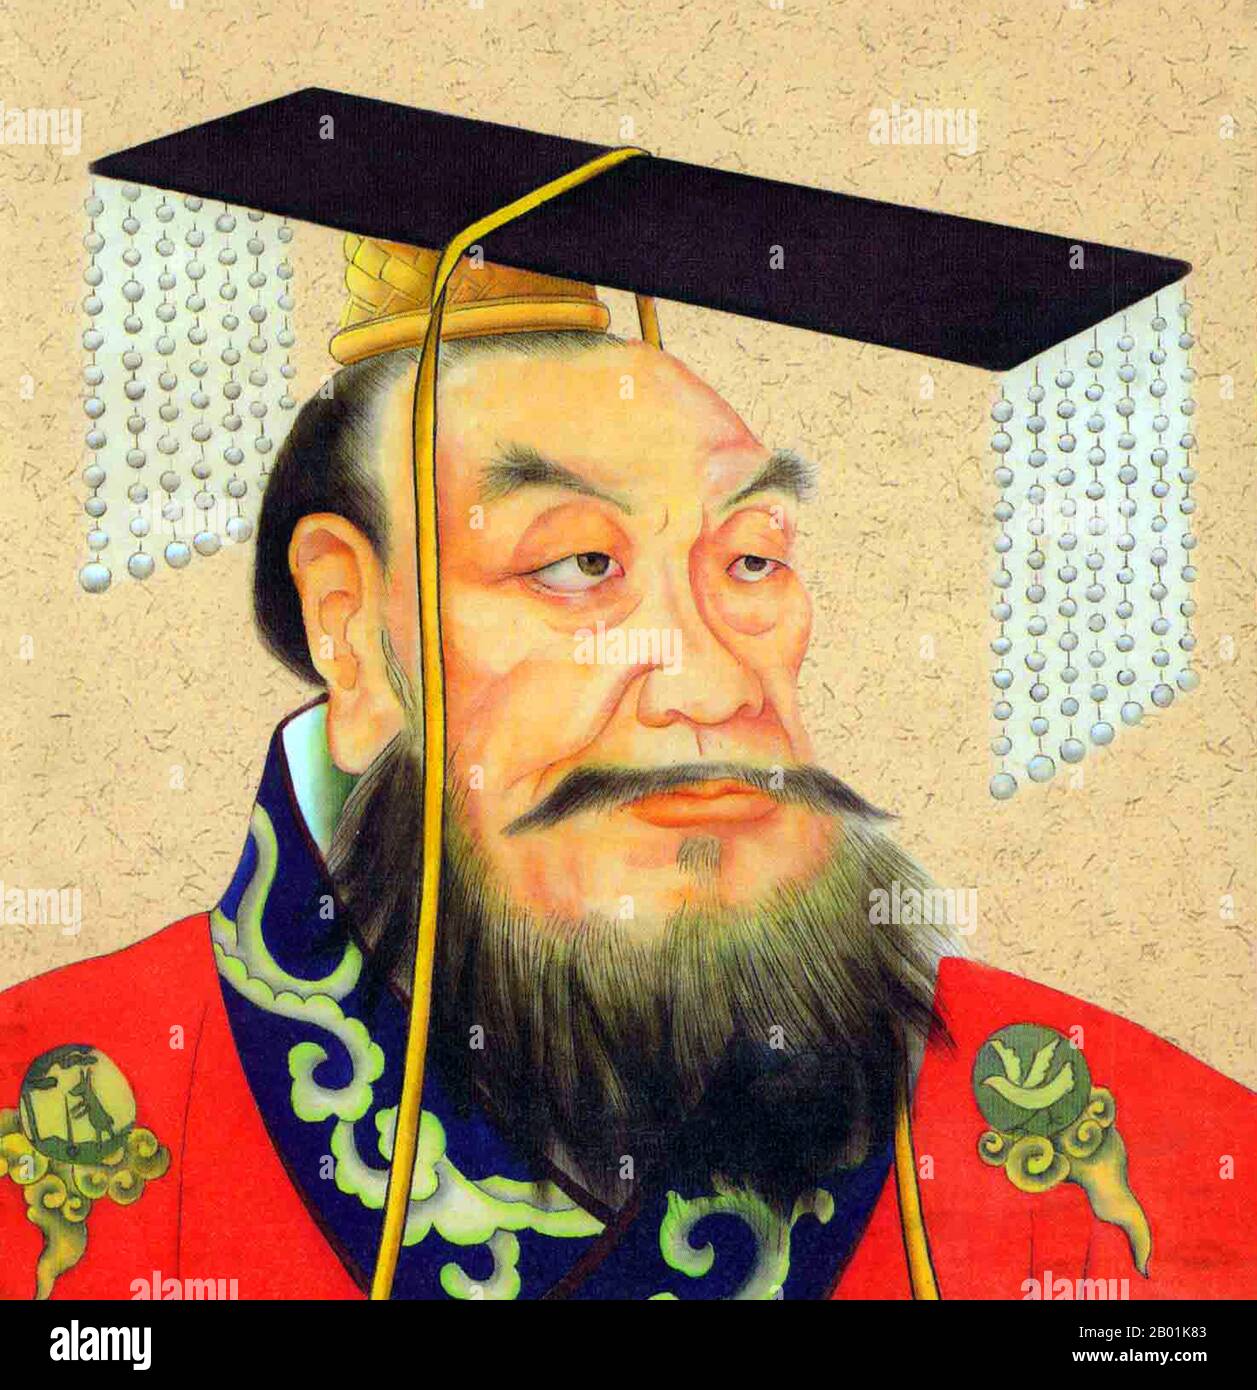 Qin Shi Huang (259–210 BCE), personal name Ying Zheng, was king of the Chinese State of Qin from 246 to 221 BCE during the Warring States Period. He became the first emperor of a unified China in 221 BCE, and ruled until his death in 210 BC at the age of 49. Styling himself 'First Emperor' after China's unification, Qin Shi Huang is a pivotal figure in Chinese history, ushering in nearly two millennia of imperial rule.  After unifying China, he and his chief advisor Li Si passed a series of major economic and political reforms. He undertook gigantic projects, including the first version of the Stock Photo